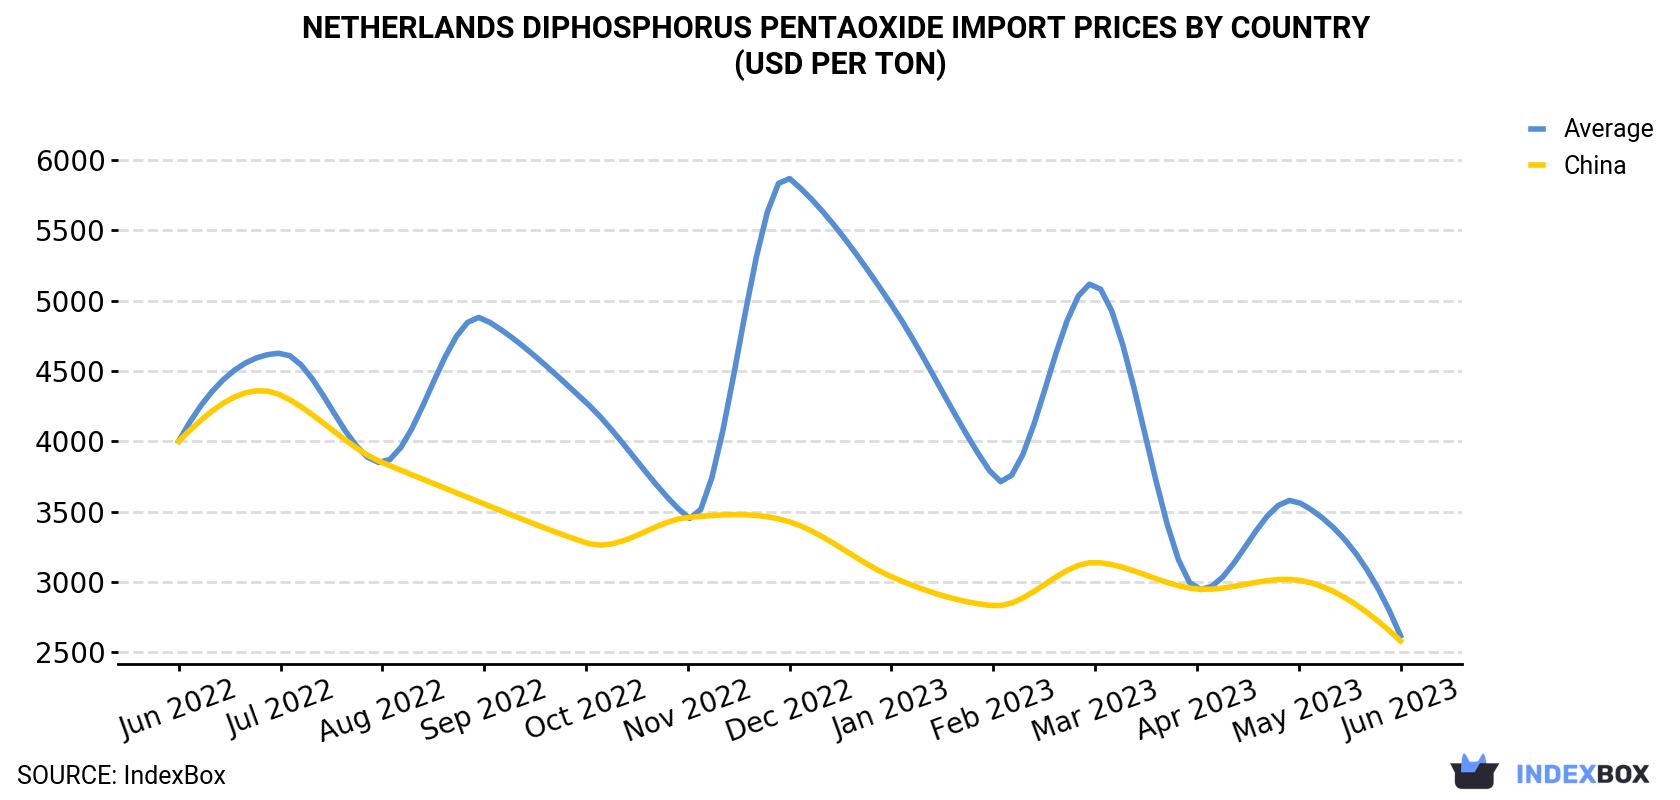 Netherlands Diphosphorus Pentaoxide Import Prices By Country (USD Per Ton)